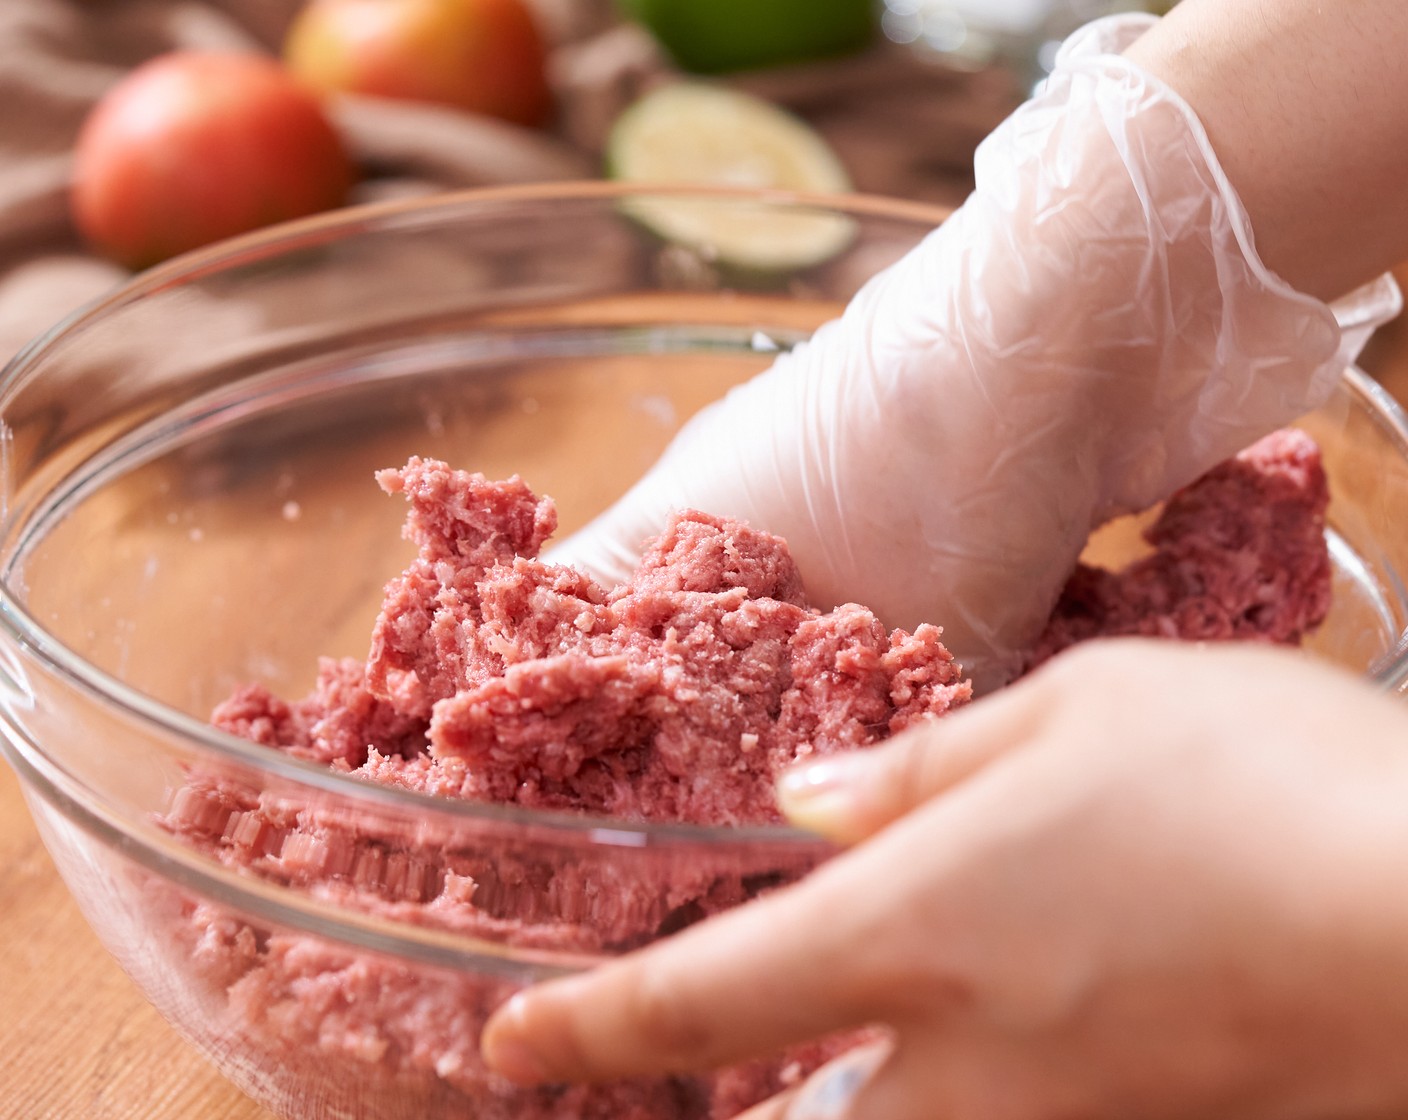 step 2 Using gloved hands, combine Ground Beef (2 lb) with the Salt (1 tsp) and Ground Black Pepper (1/2 tsp) until just combined, don’t overwork so that the meat still keeps the soft texture.